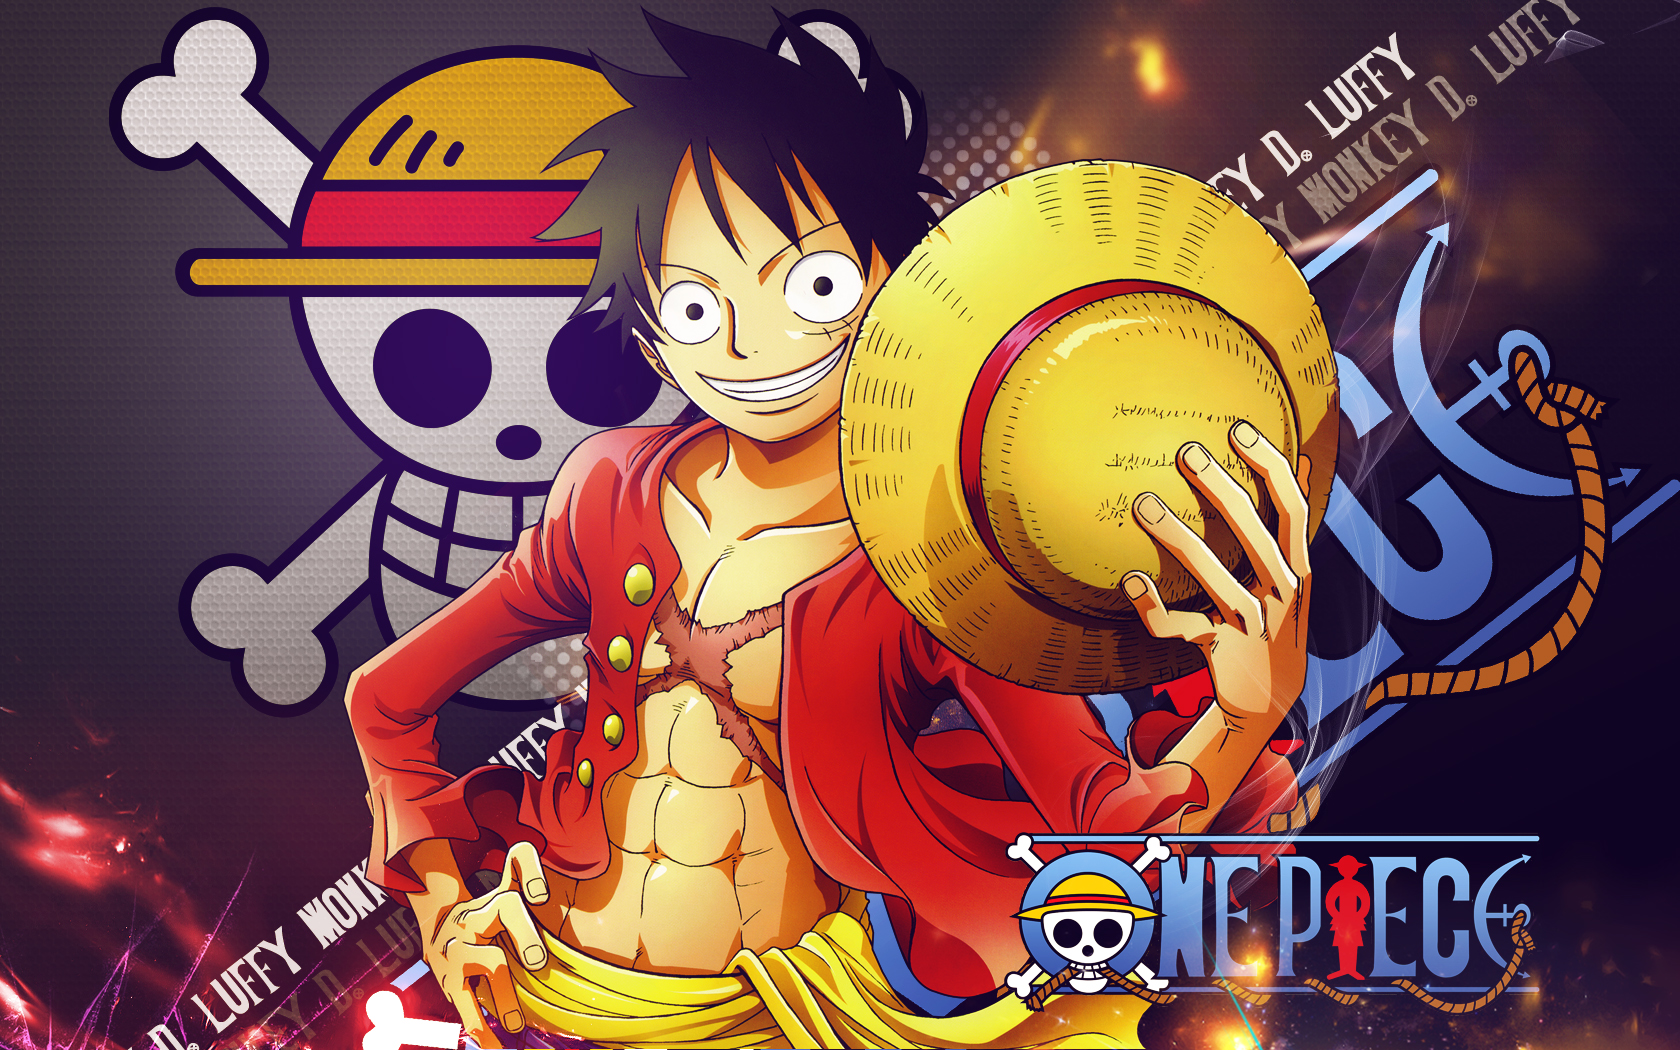 cool backrounds   One Piece Wallpaper 31311293 1680x1050